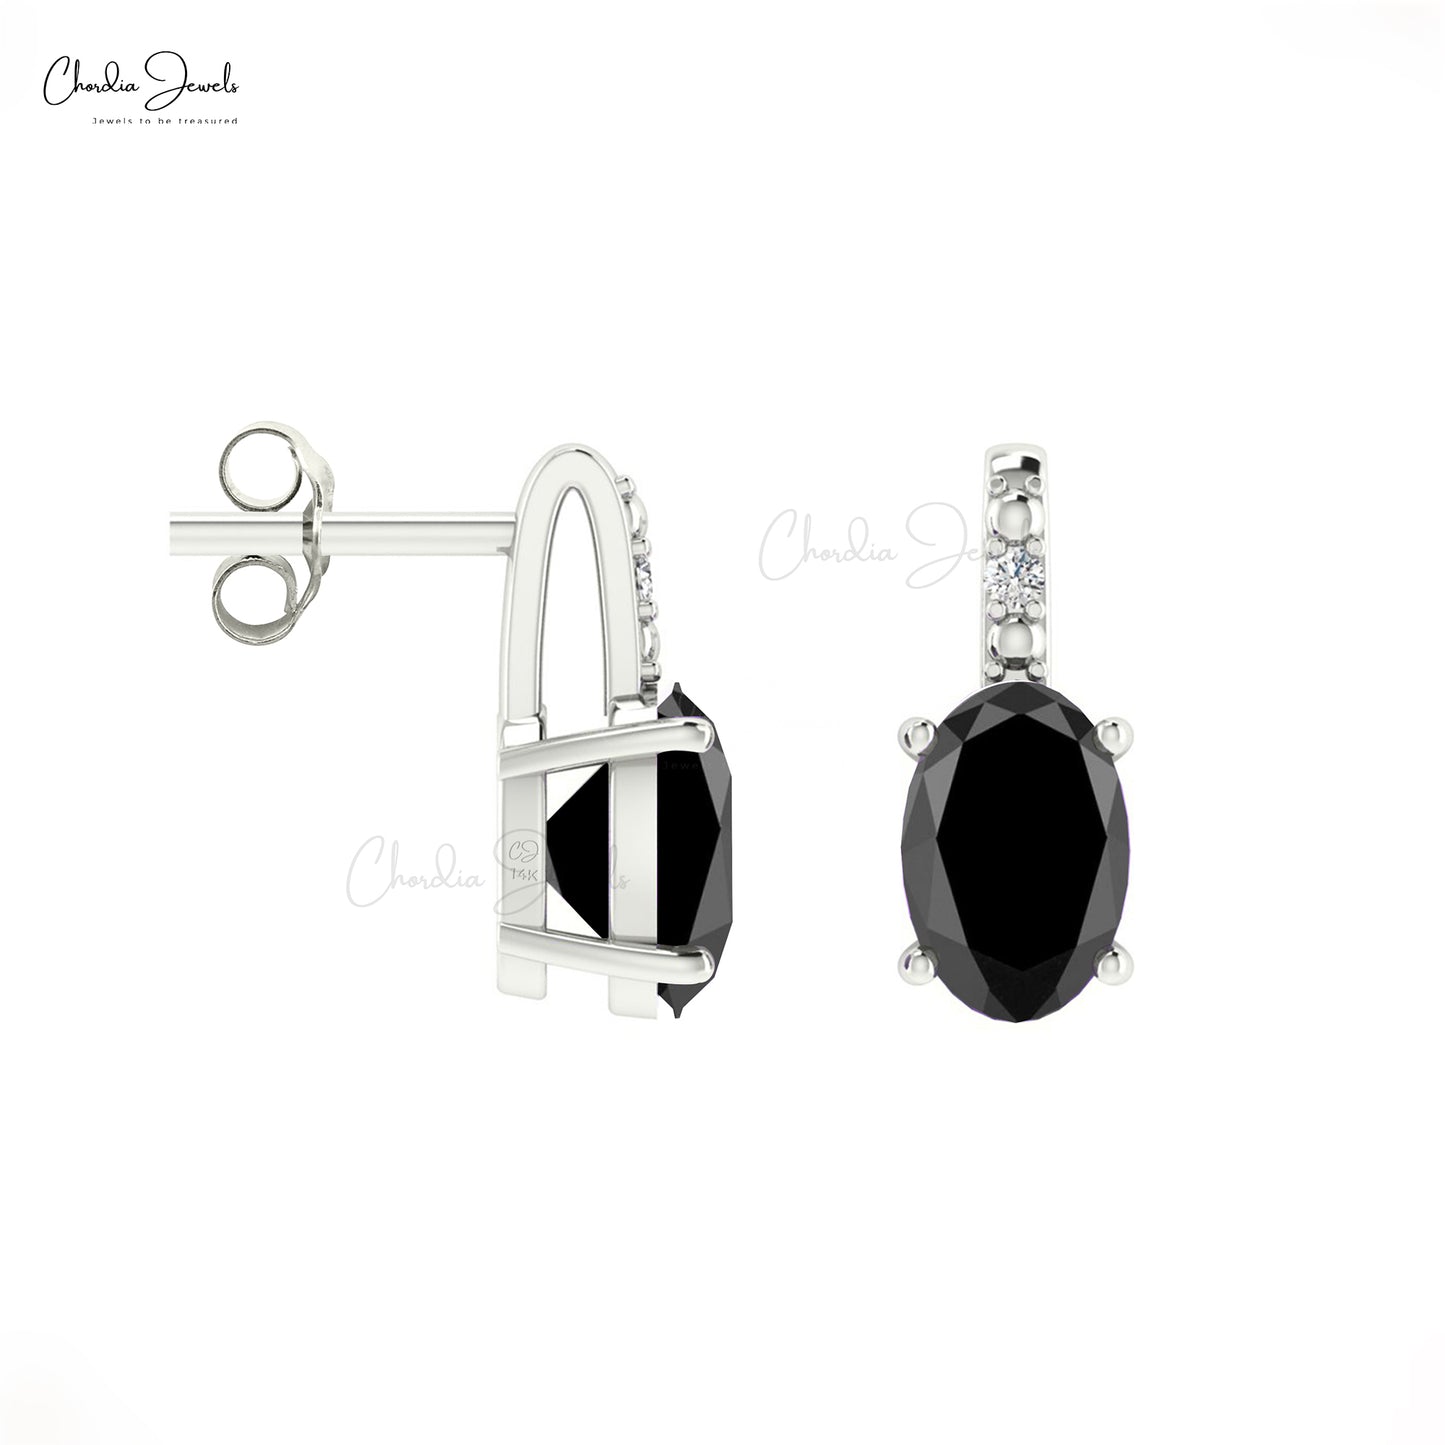 New Design Vintage Genuine Black Diamond Dangle Earring 1mm Round Cut Natural White Diamond Earring 14k Pure Gold Jewelry For Wedding Gift